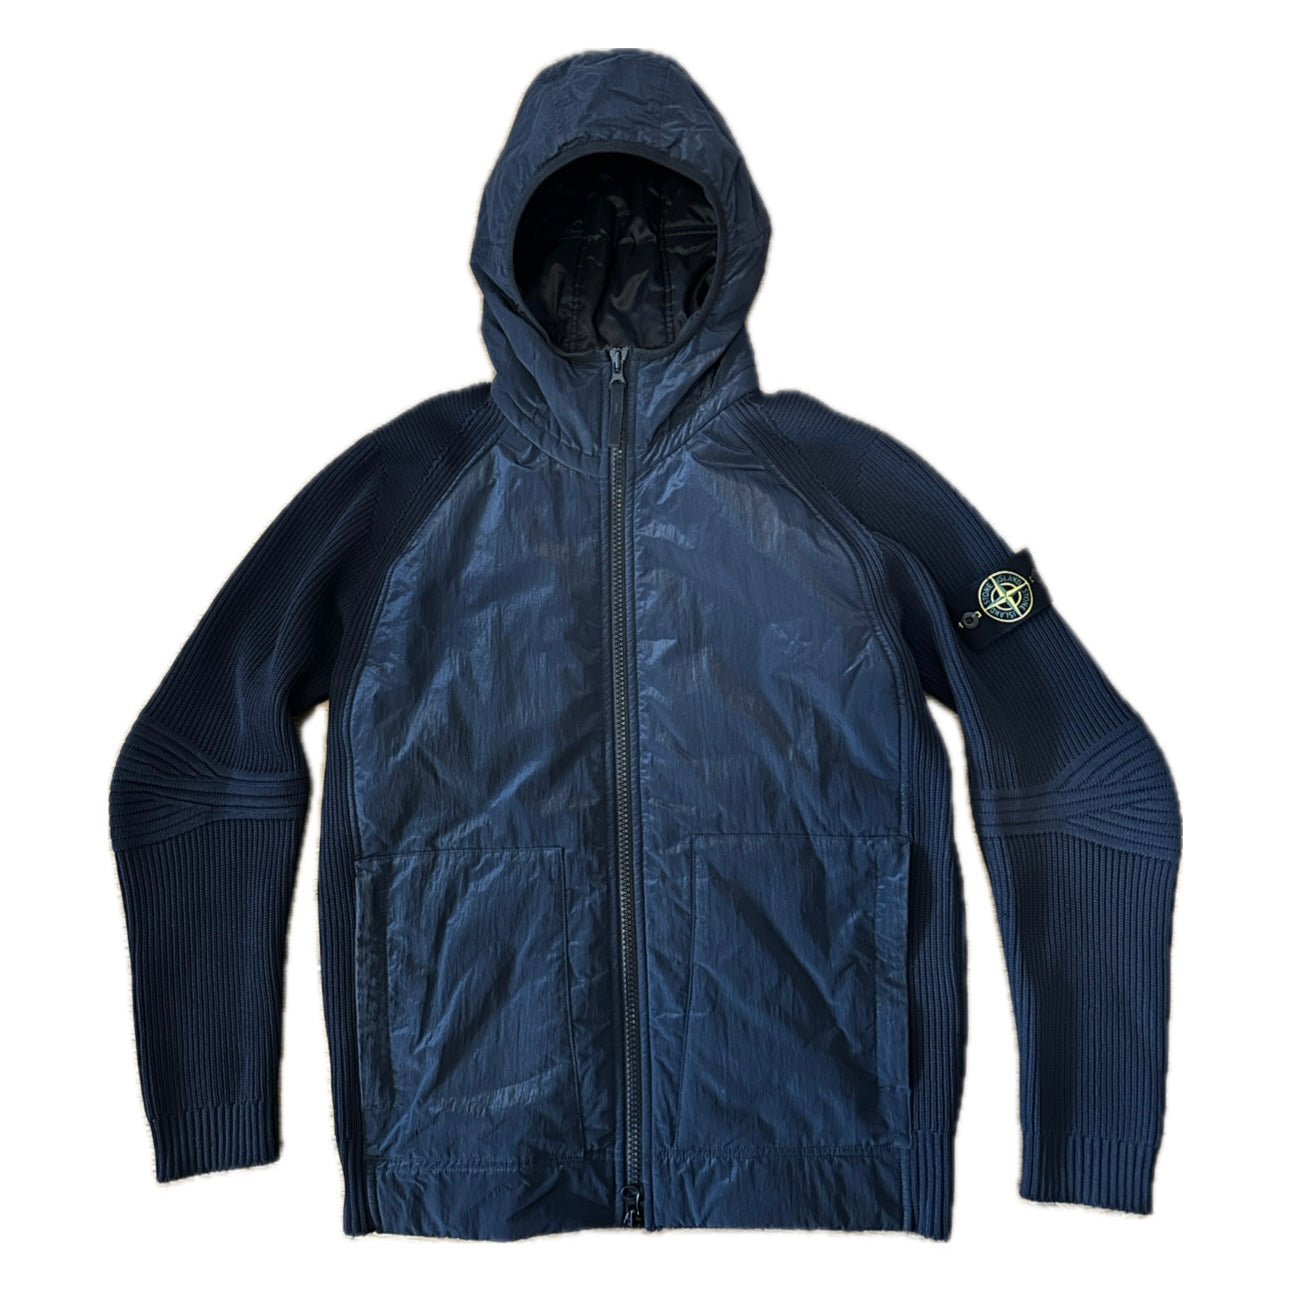 Stone Island 2016 Nylon Metal / Knit Hooded Jacket - L - Made in Italy